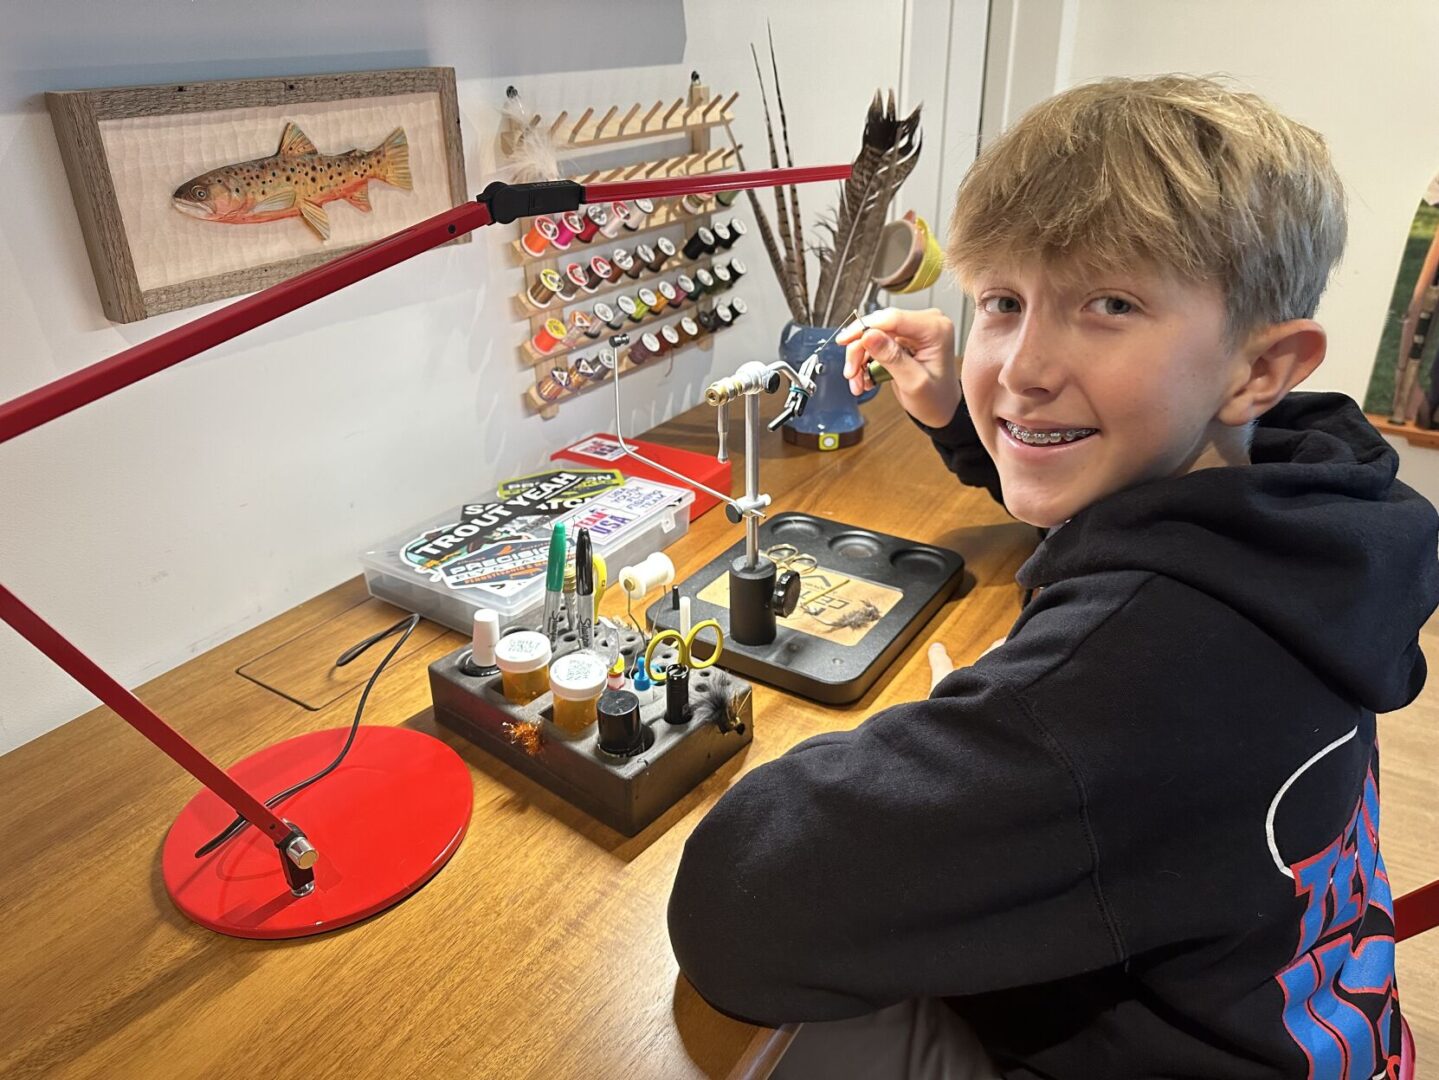 Bobby Brandt, 14, ties trout flies at his desk in his Manheim Township home.